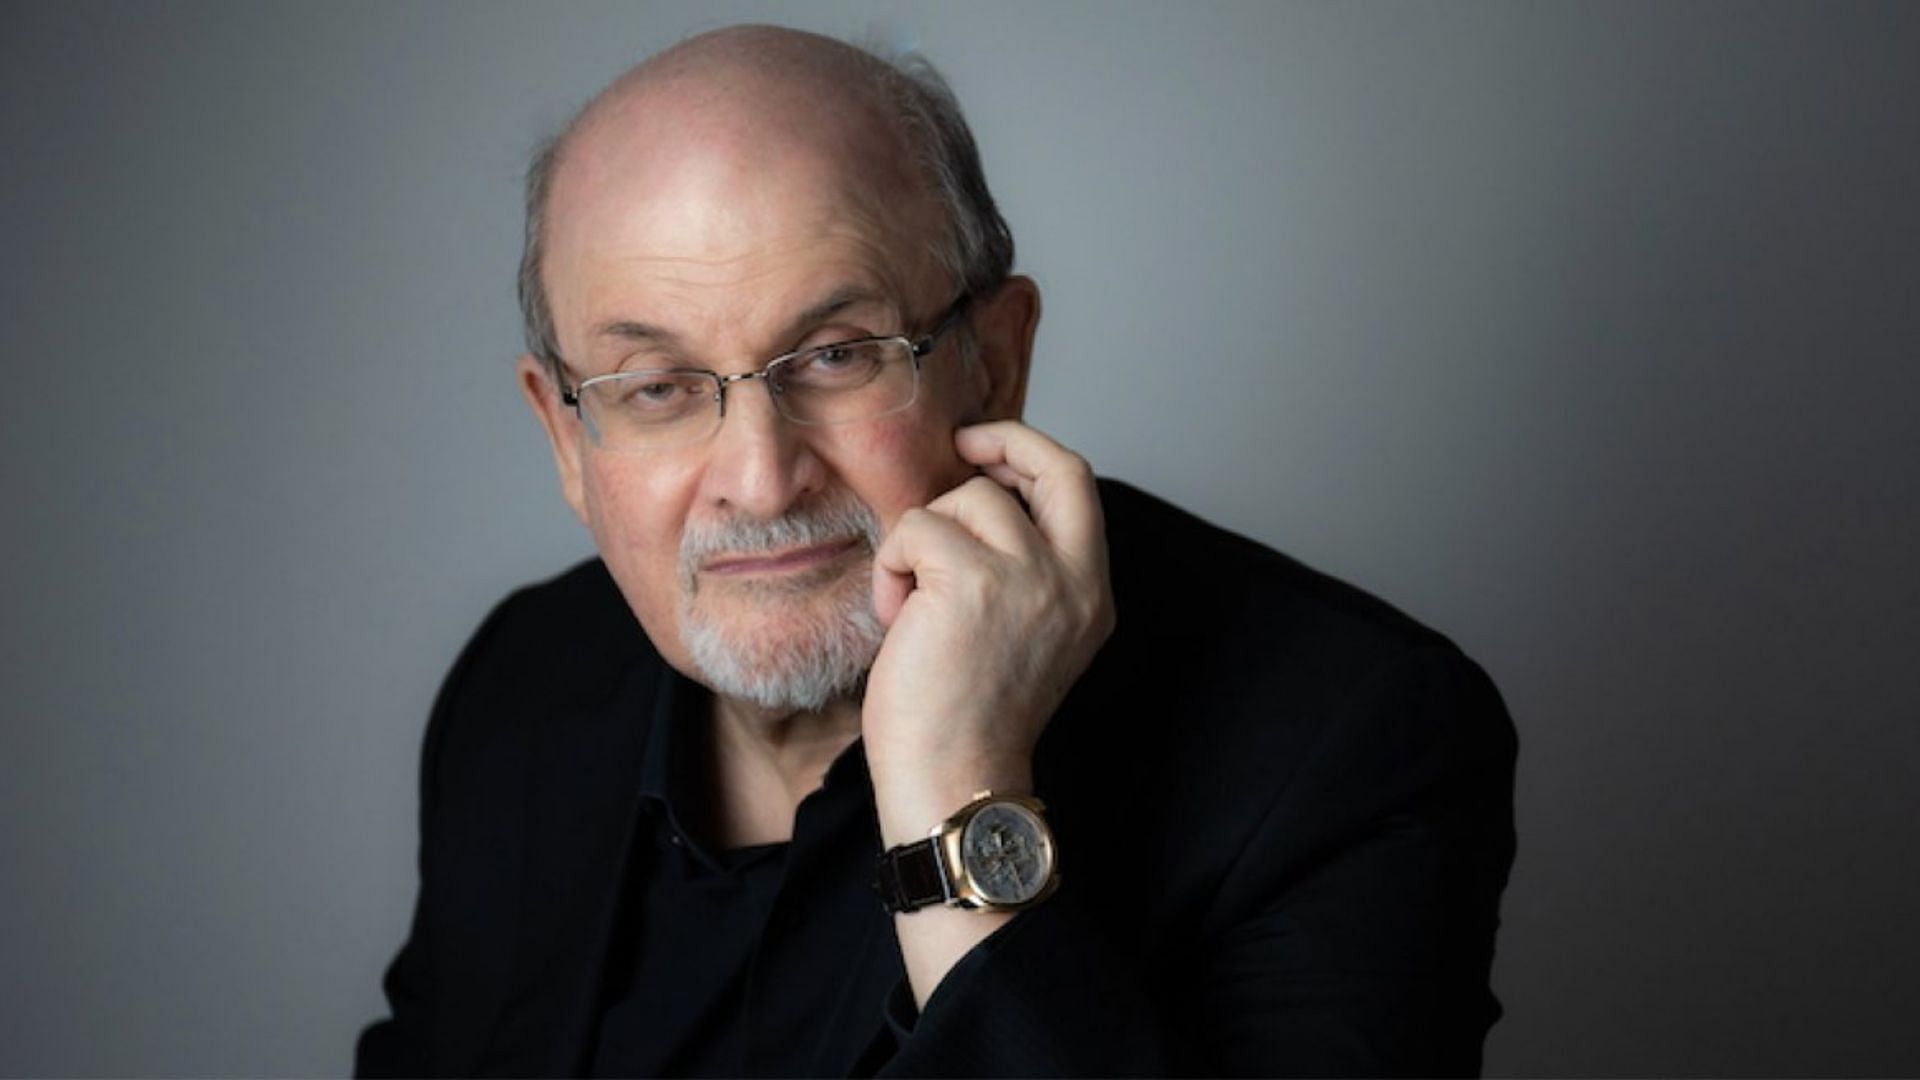 Man who stabbed author Salman Rushdie on Friday faces up to 25 years in prison (Image via Twitter @/Humanists_UK)